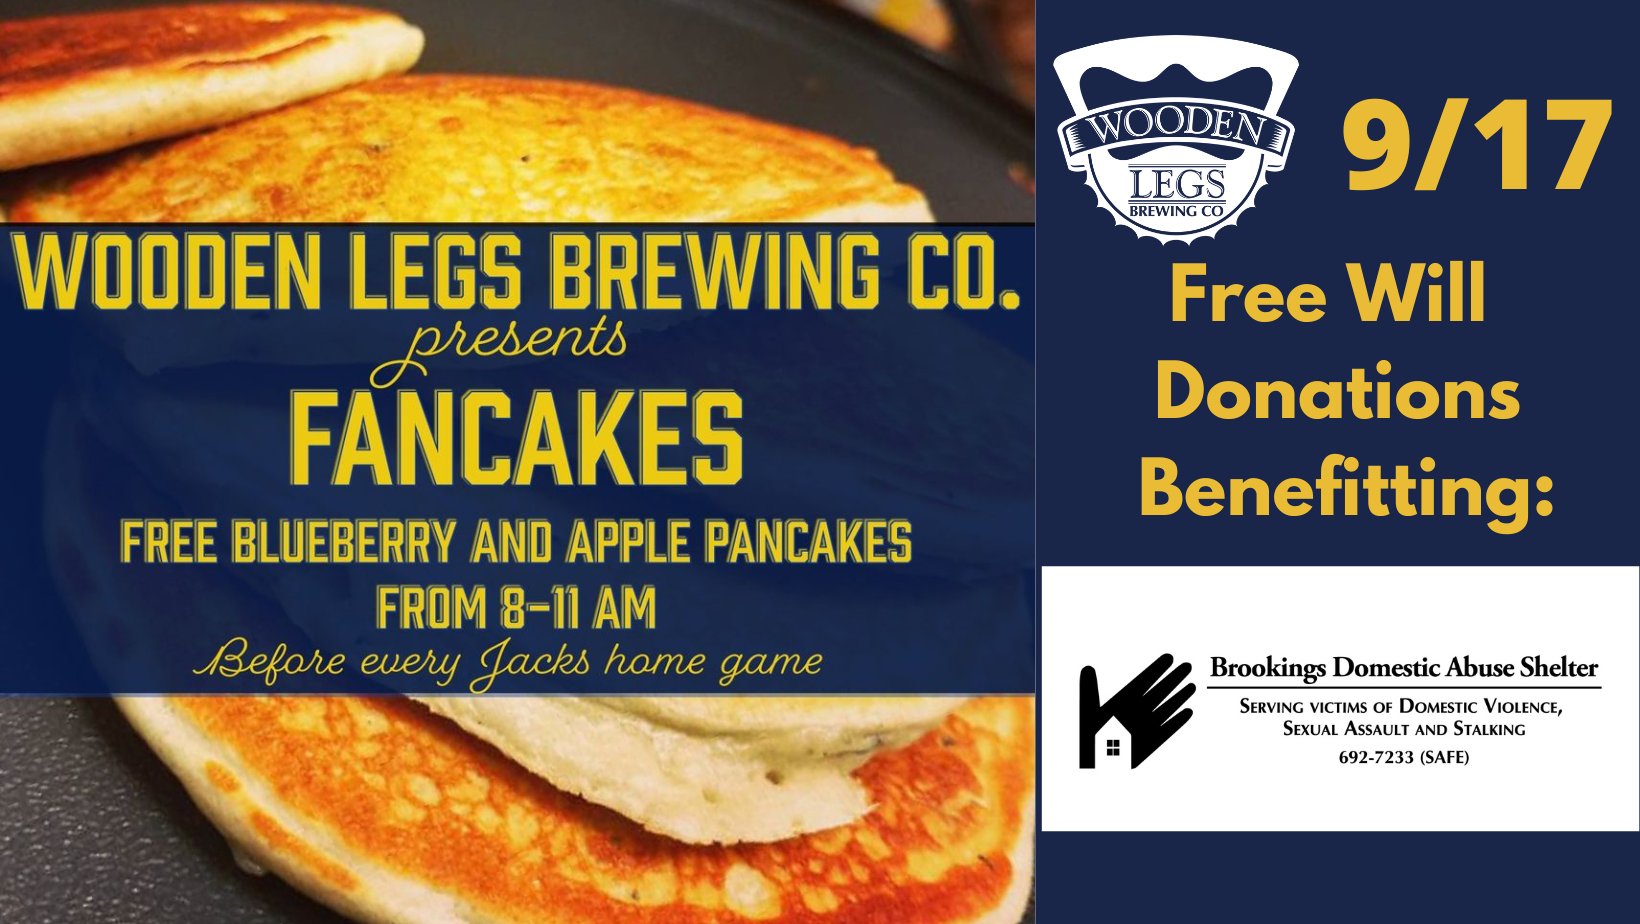 Fancakes at Wooden Legs